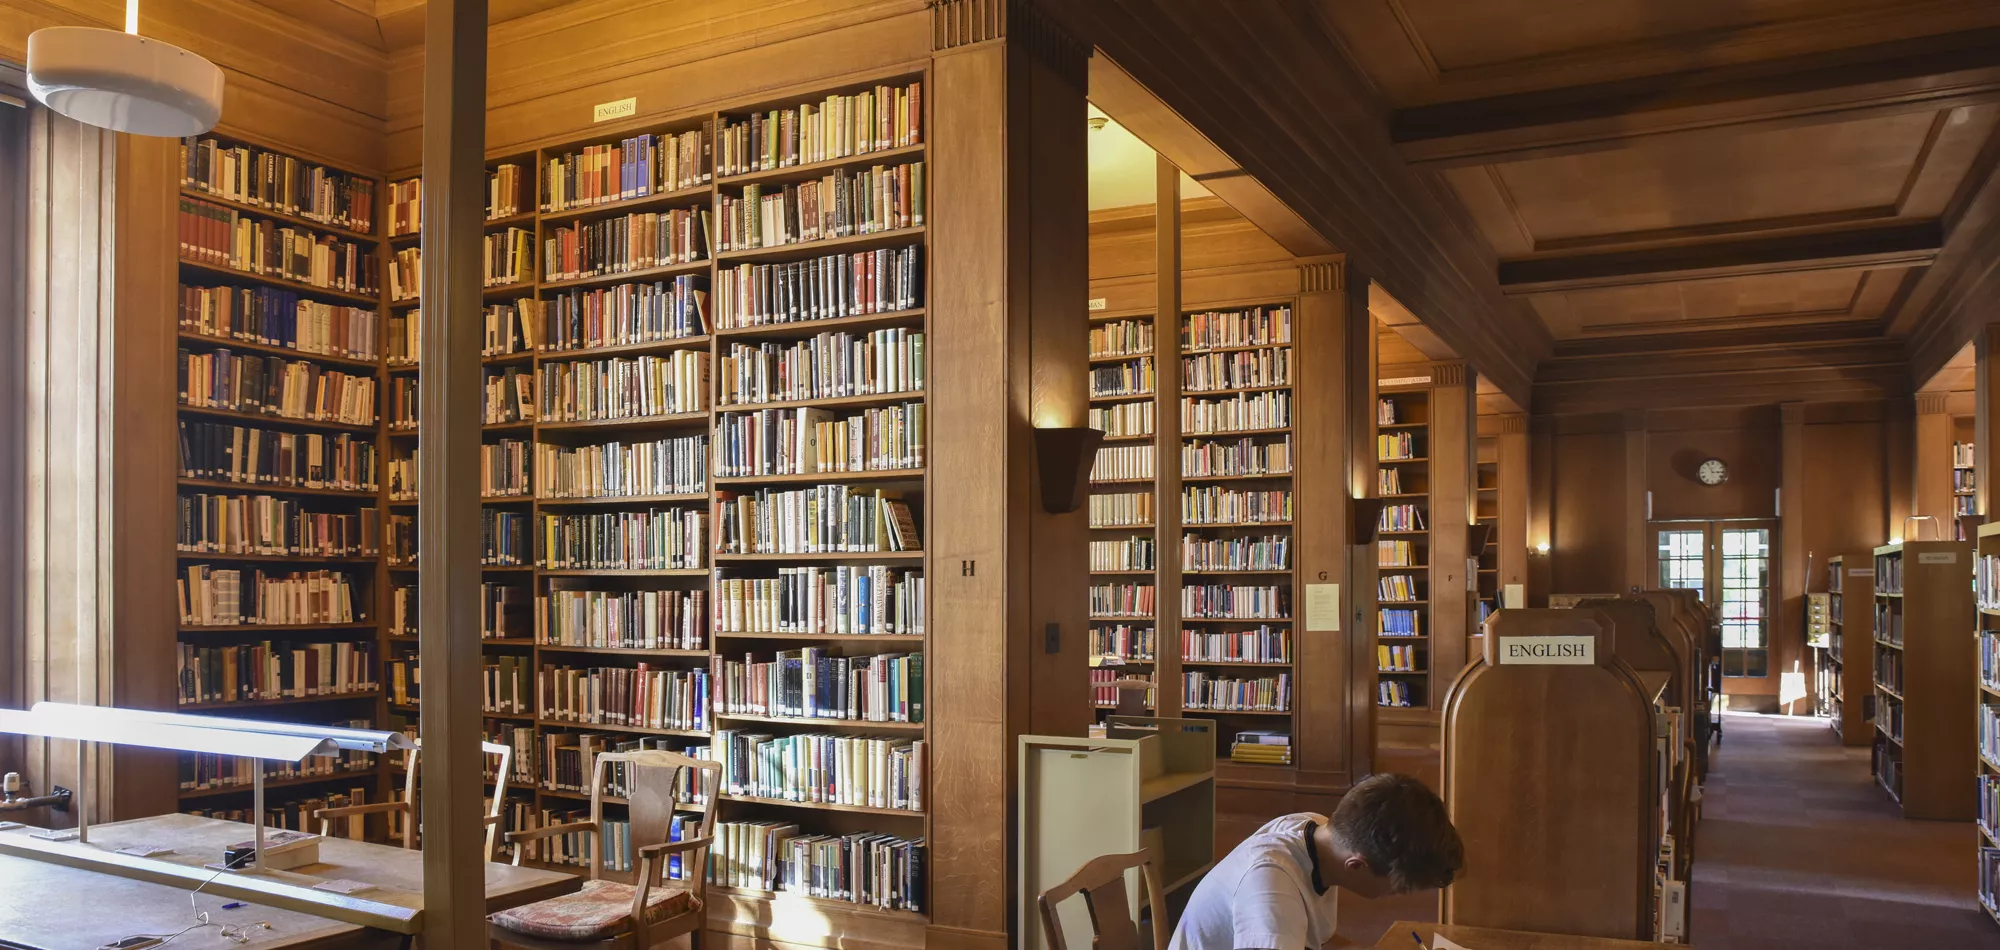 Student studying in the Upper Floor of New College Library, Oxford